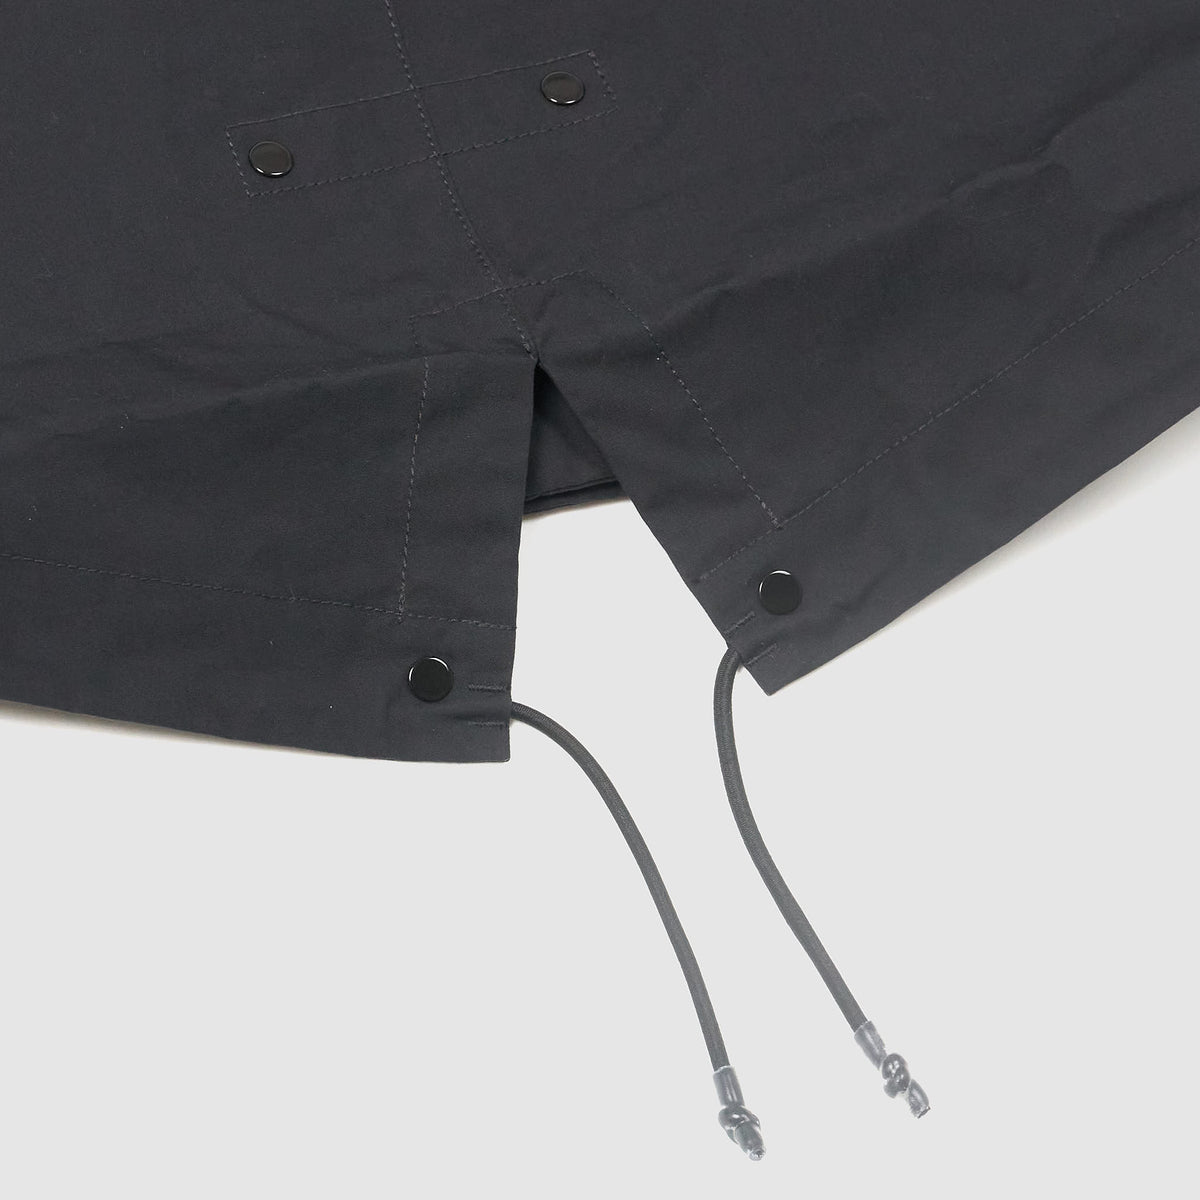 Stone Island Ghost Piece VENTILE® Fish Tail Parka